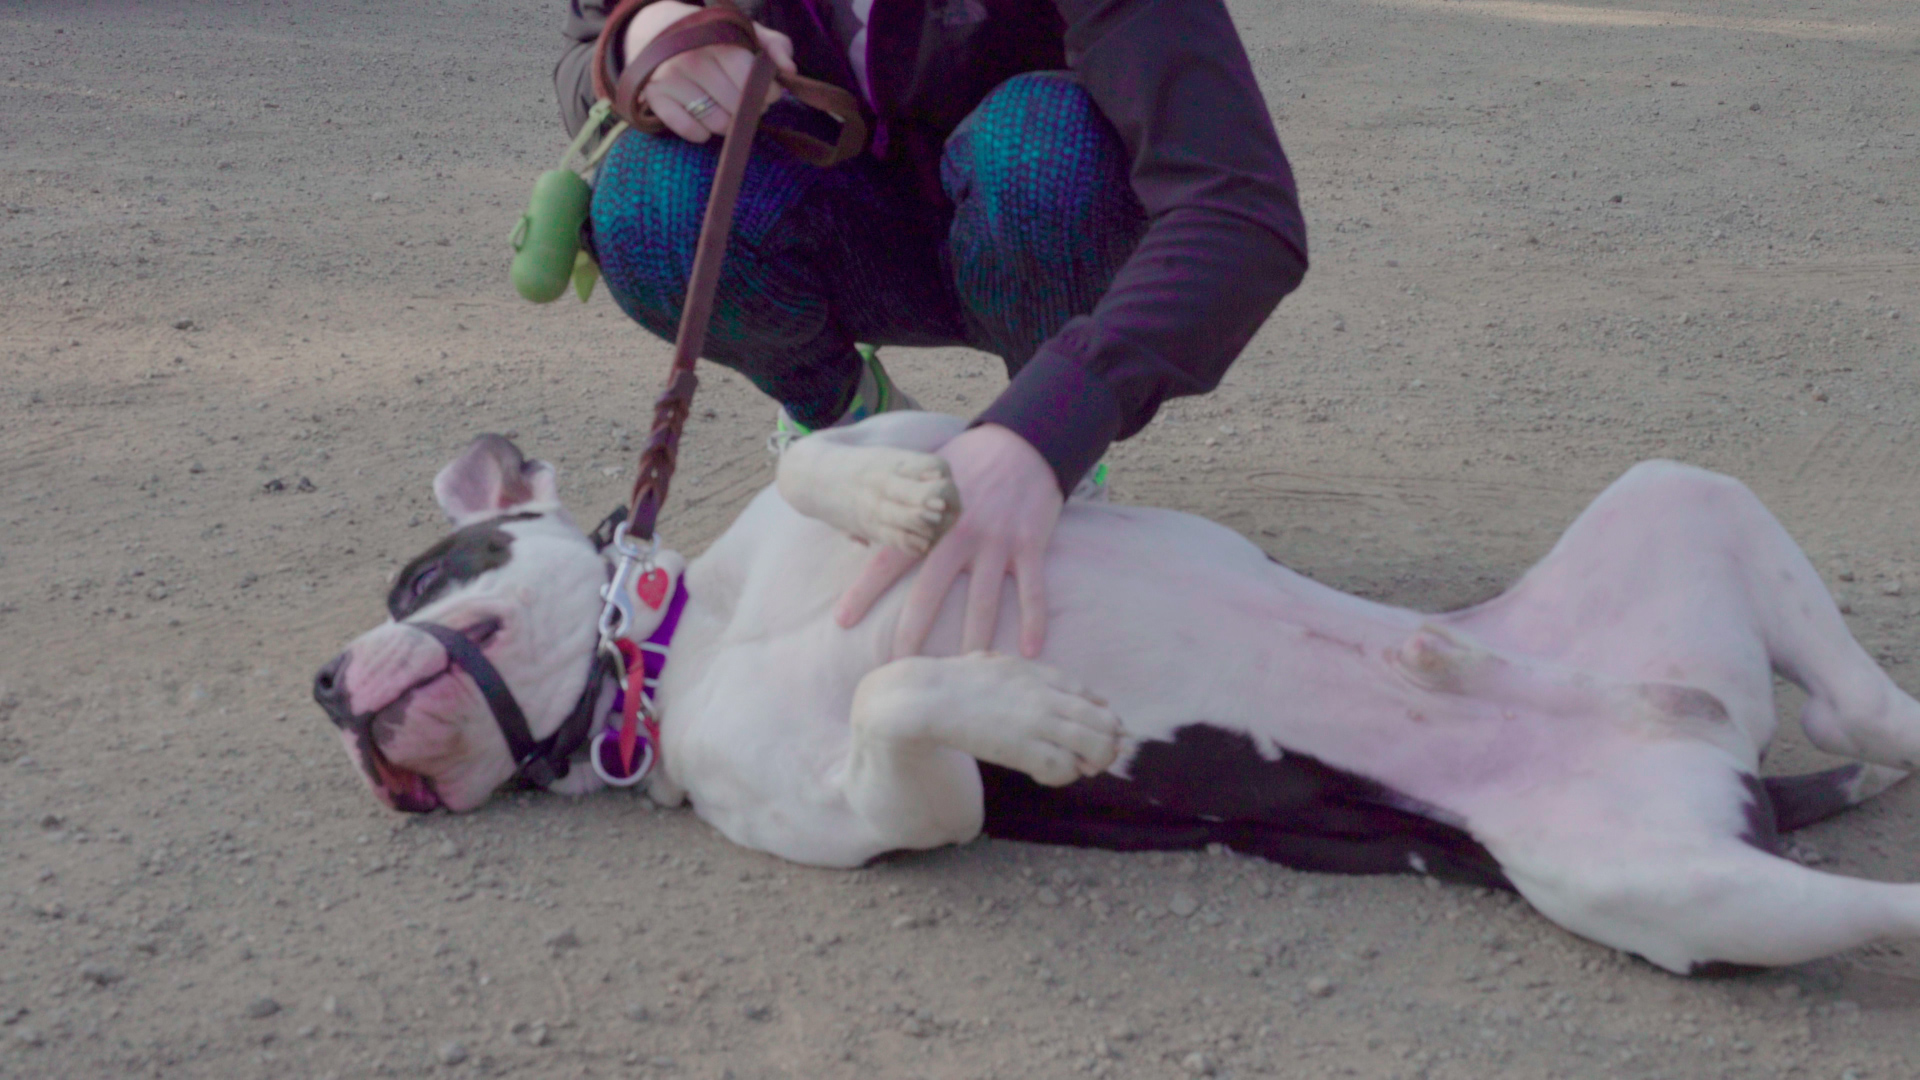 A pit bull getting their belly scratched.